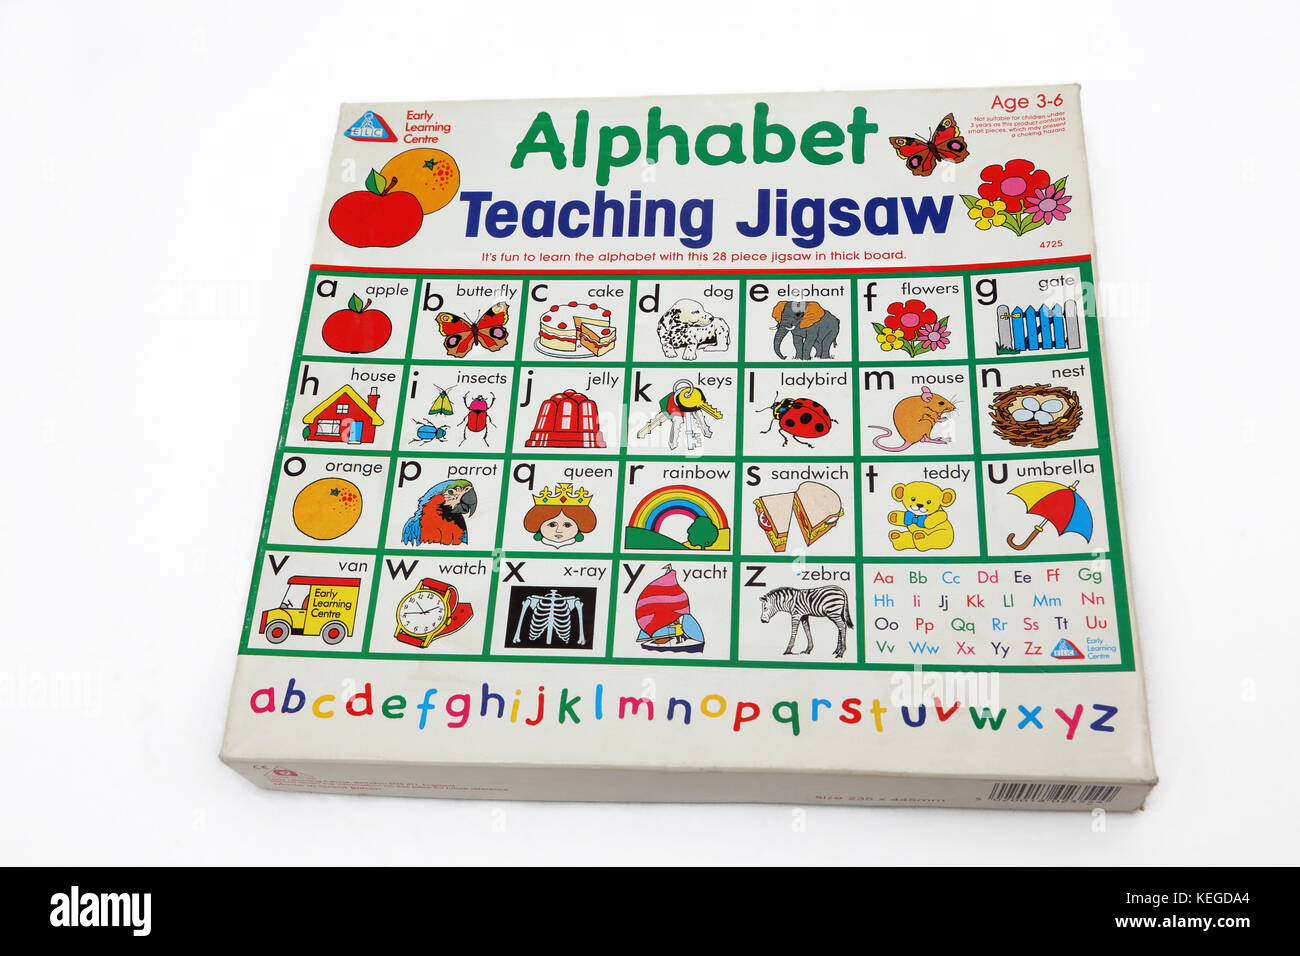 Early Learning Centre Alphabet Teaching Jigsaw Puzzle Stock Photo